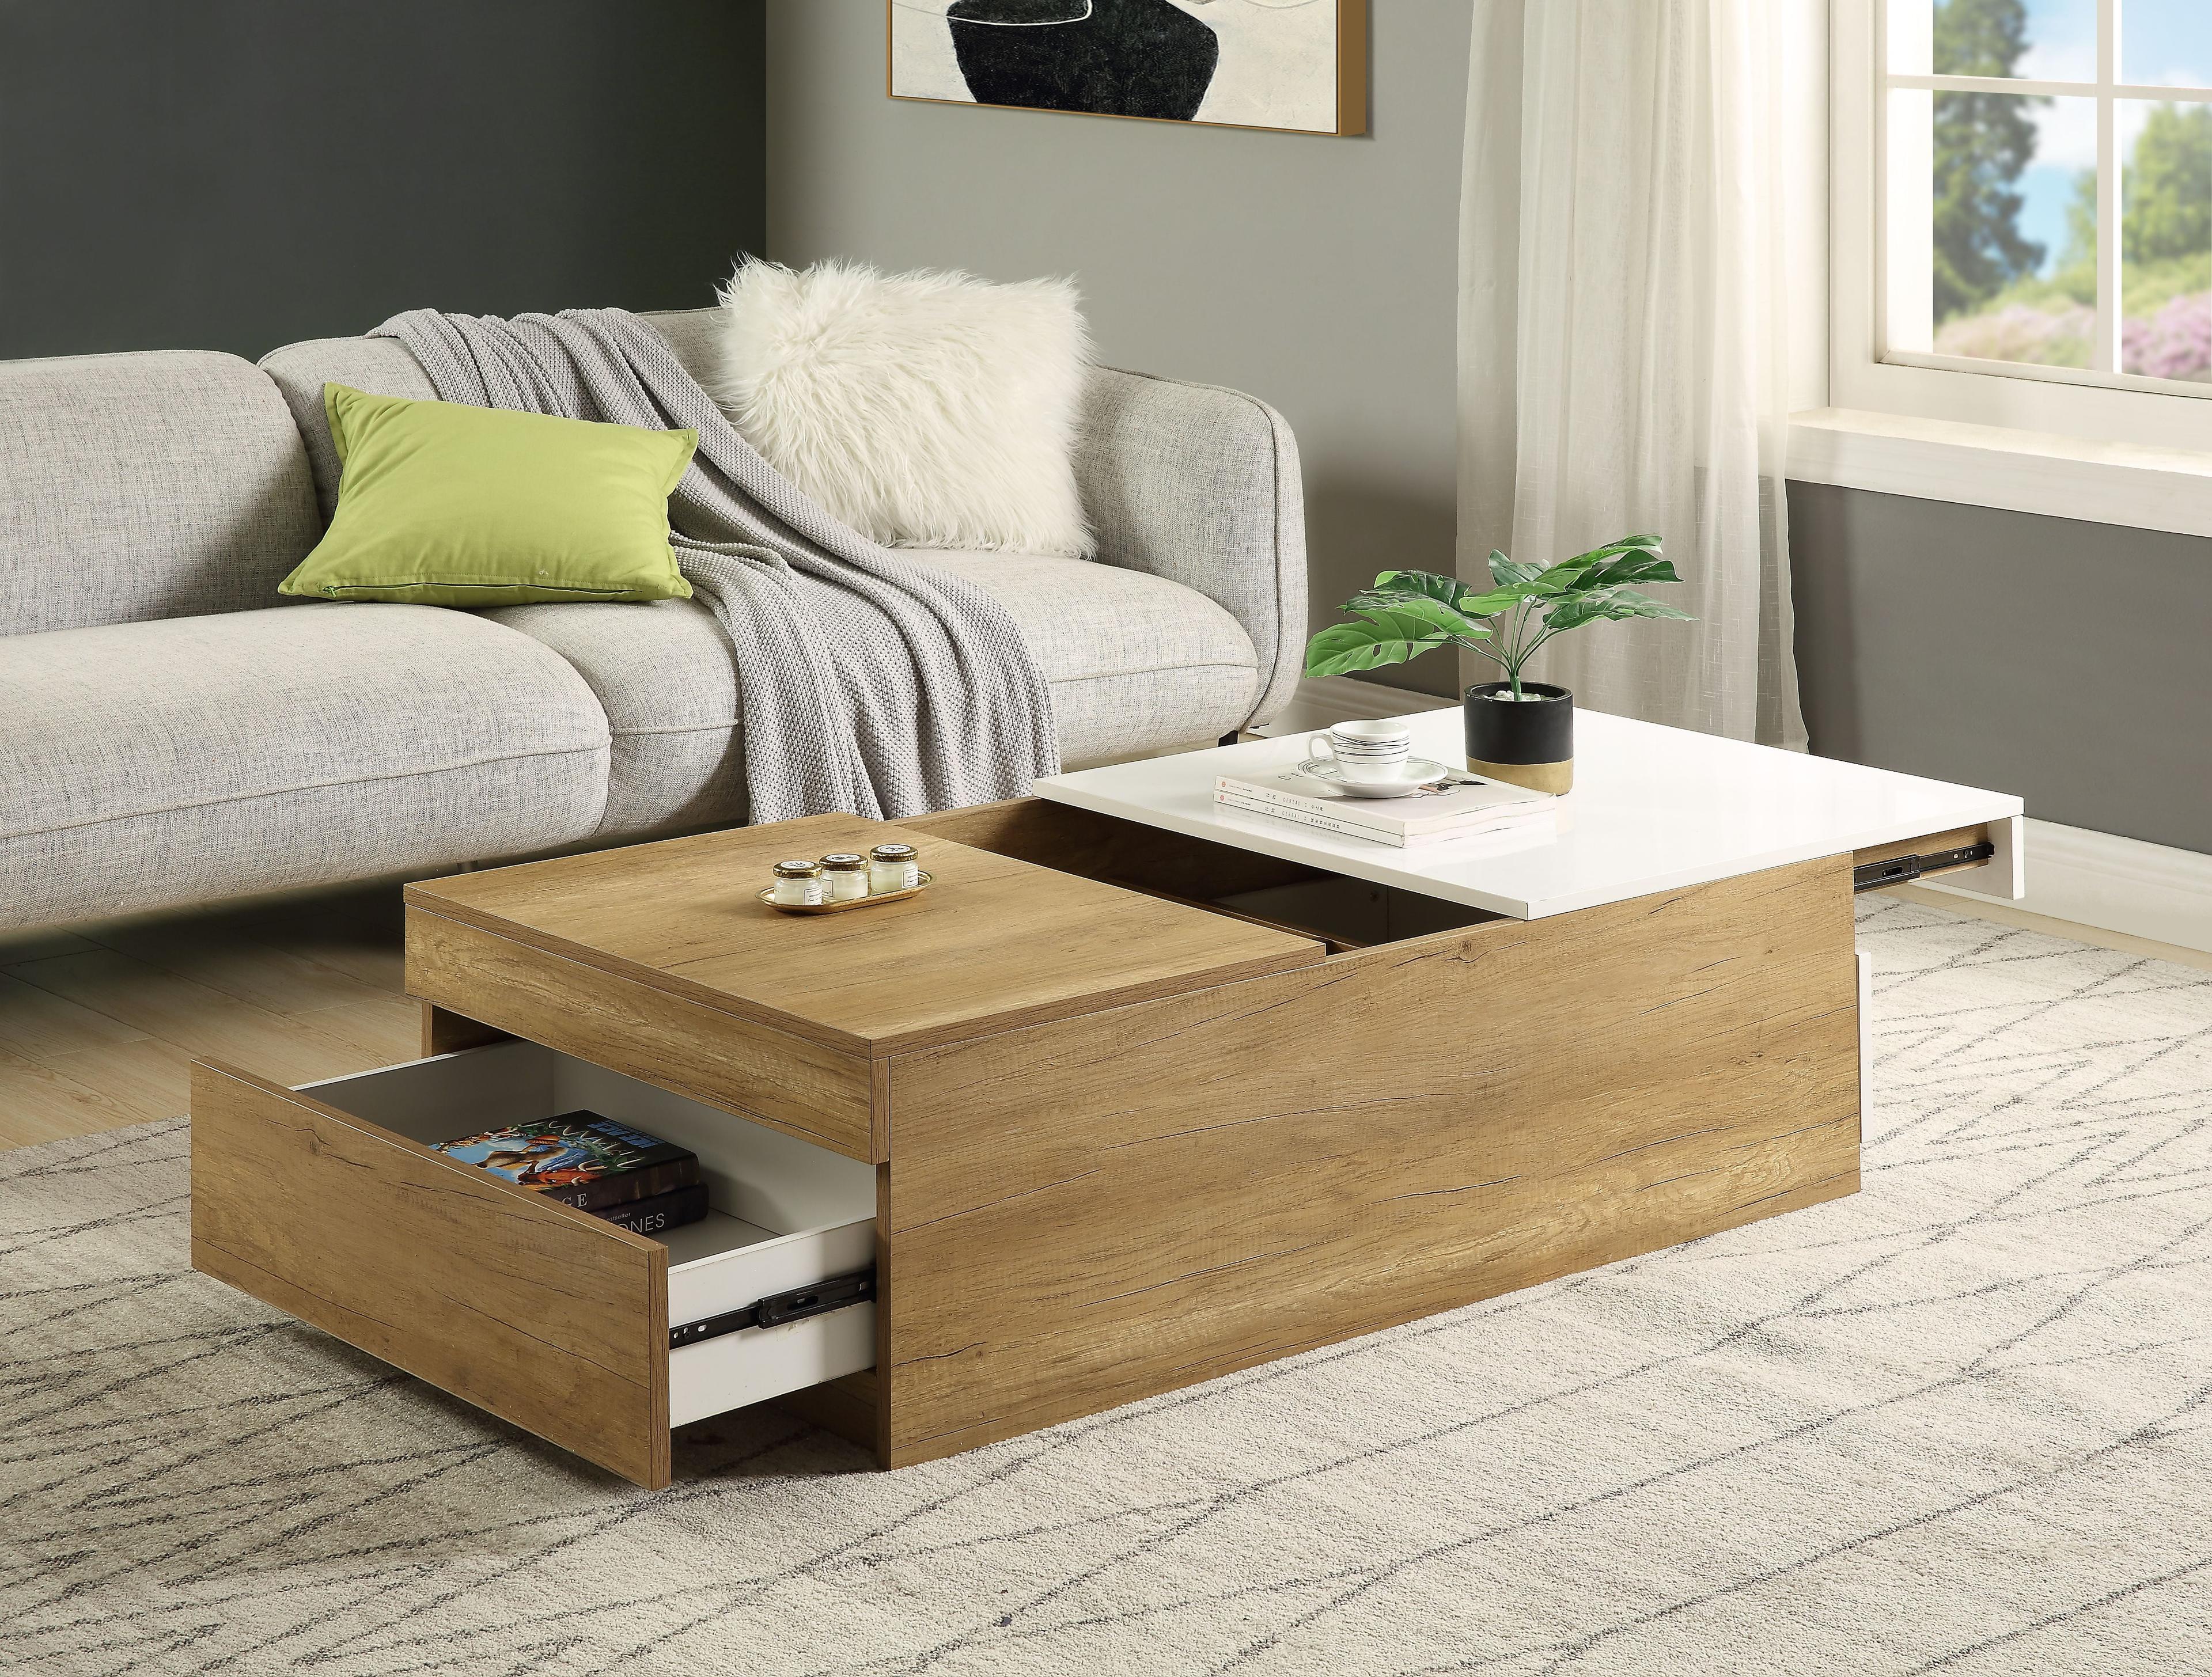 Oak and White Rectangular Coffee Table with Hidden Storage